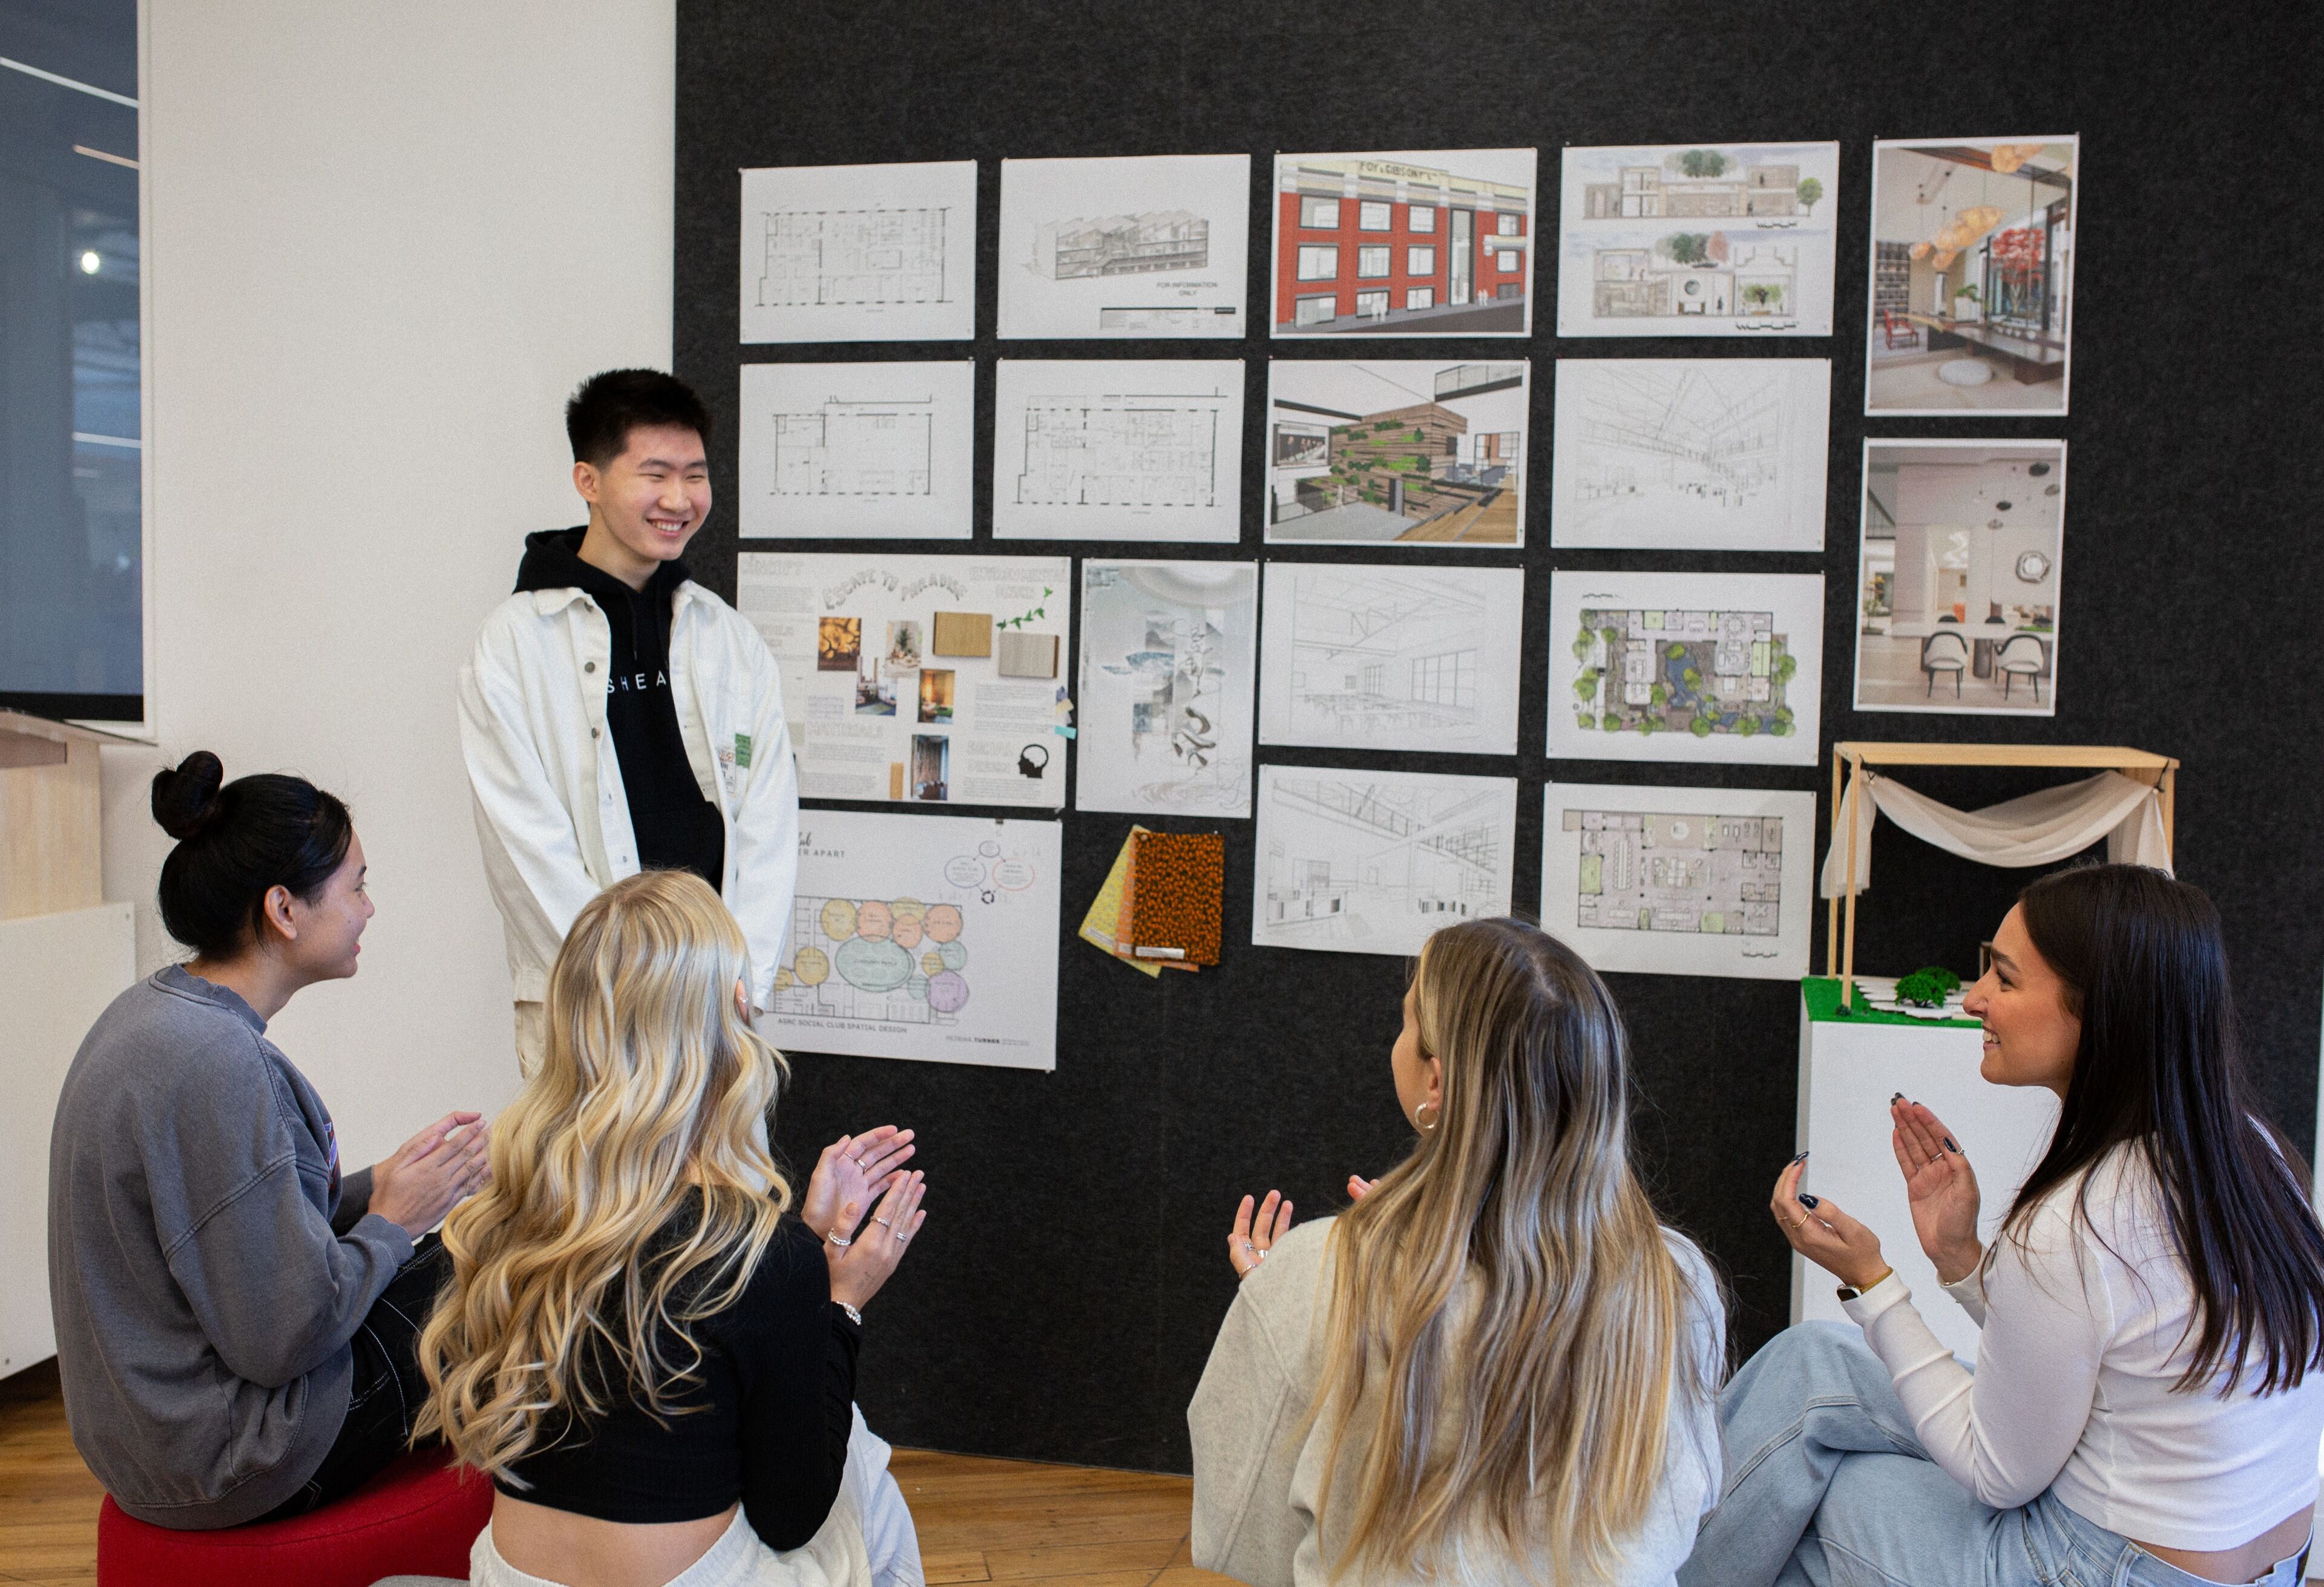 A student presents architectural designs to an attentive group, showcasing detailed plans and models on a gallery wall.